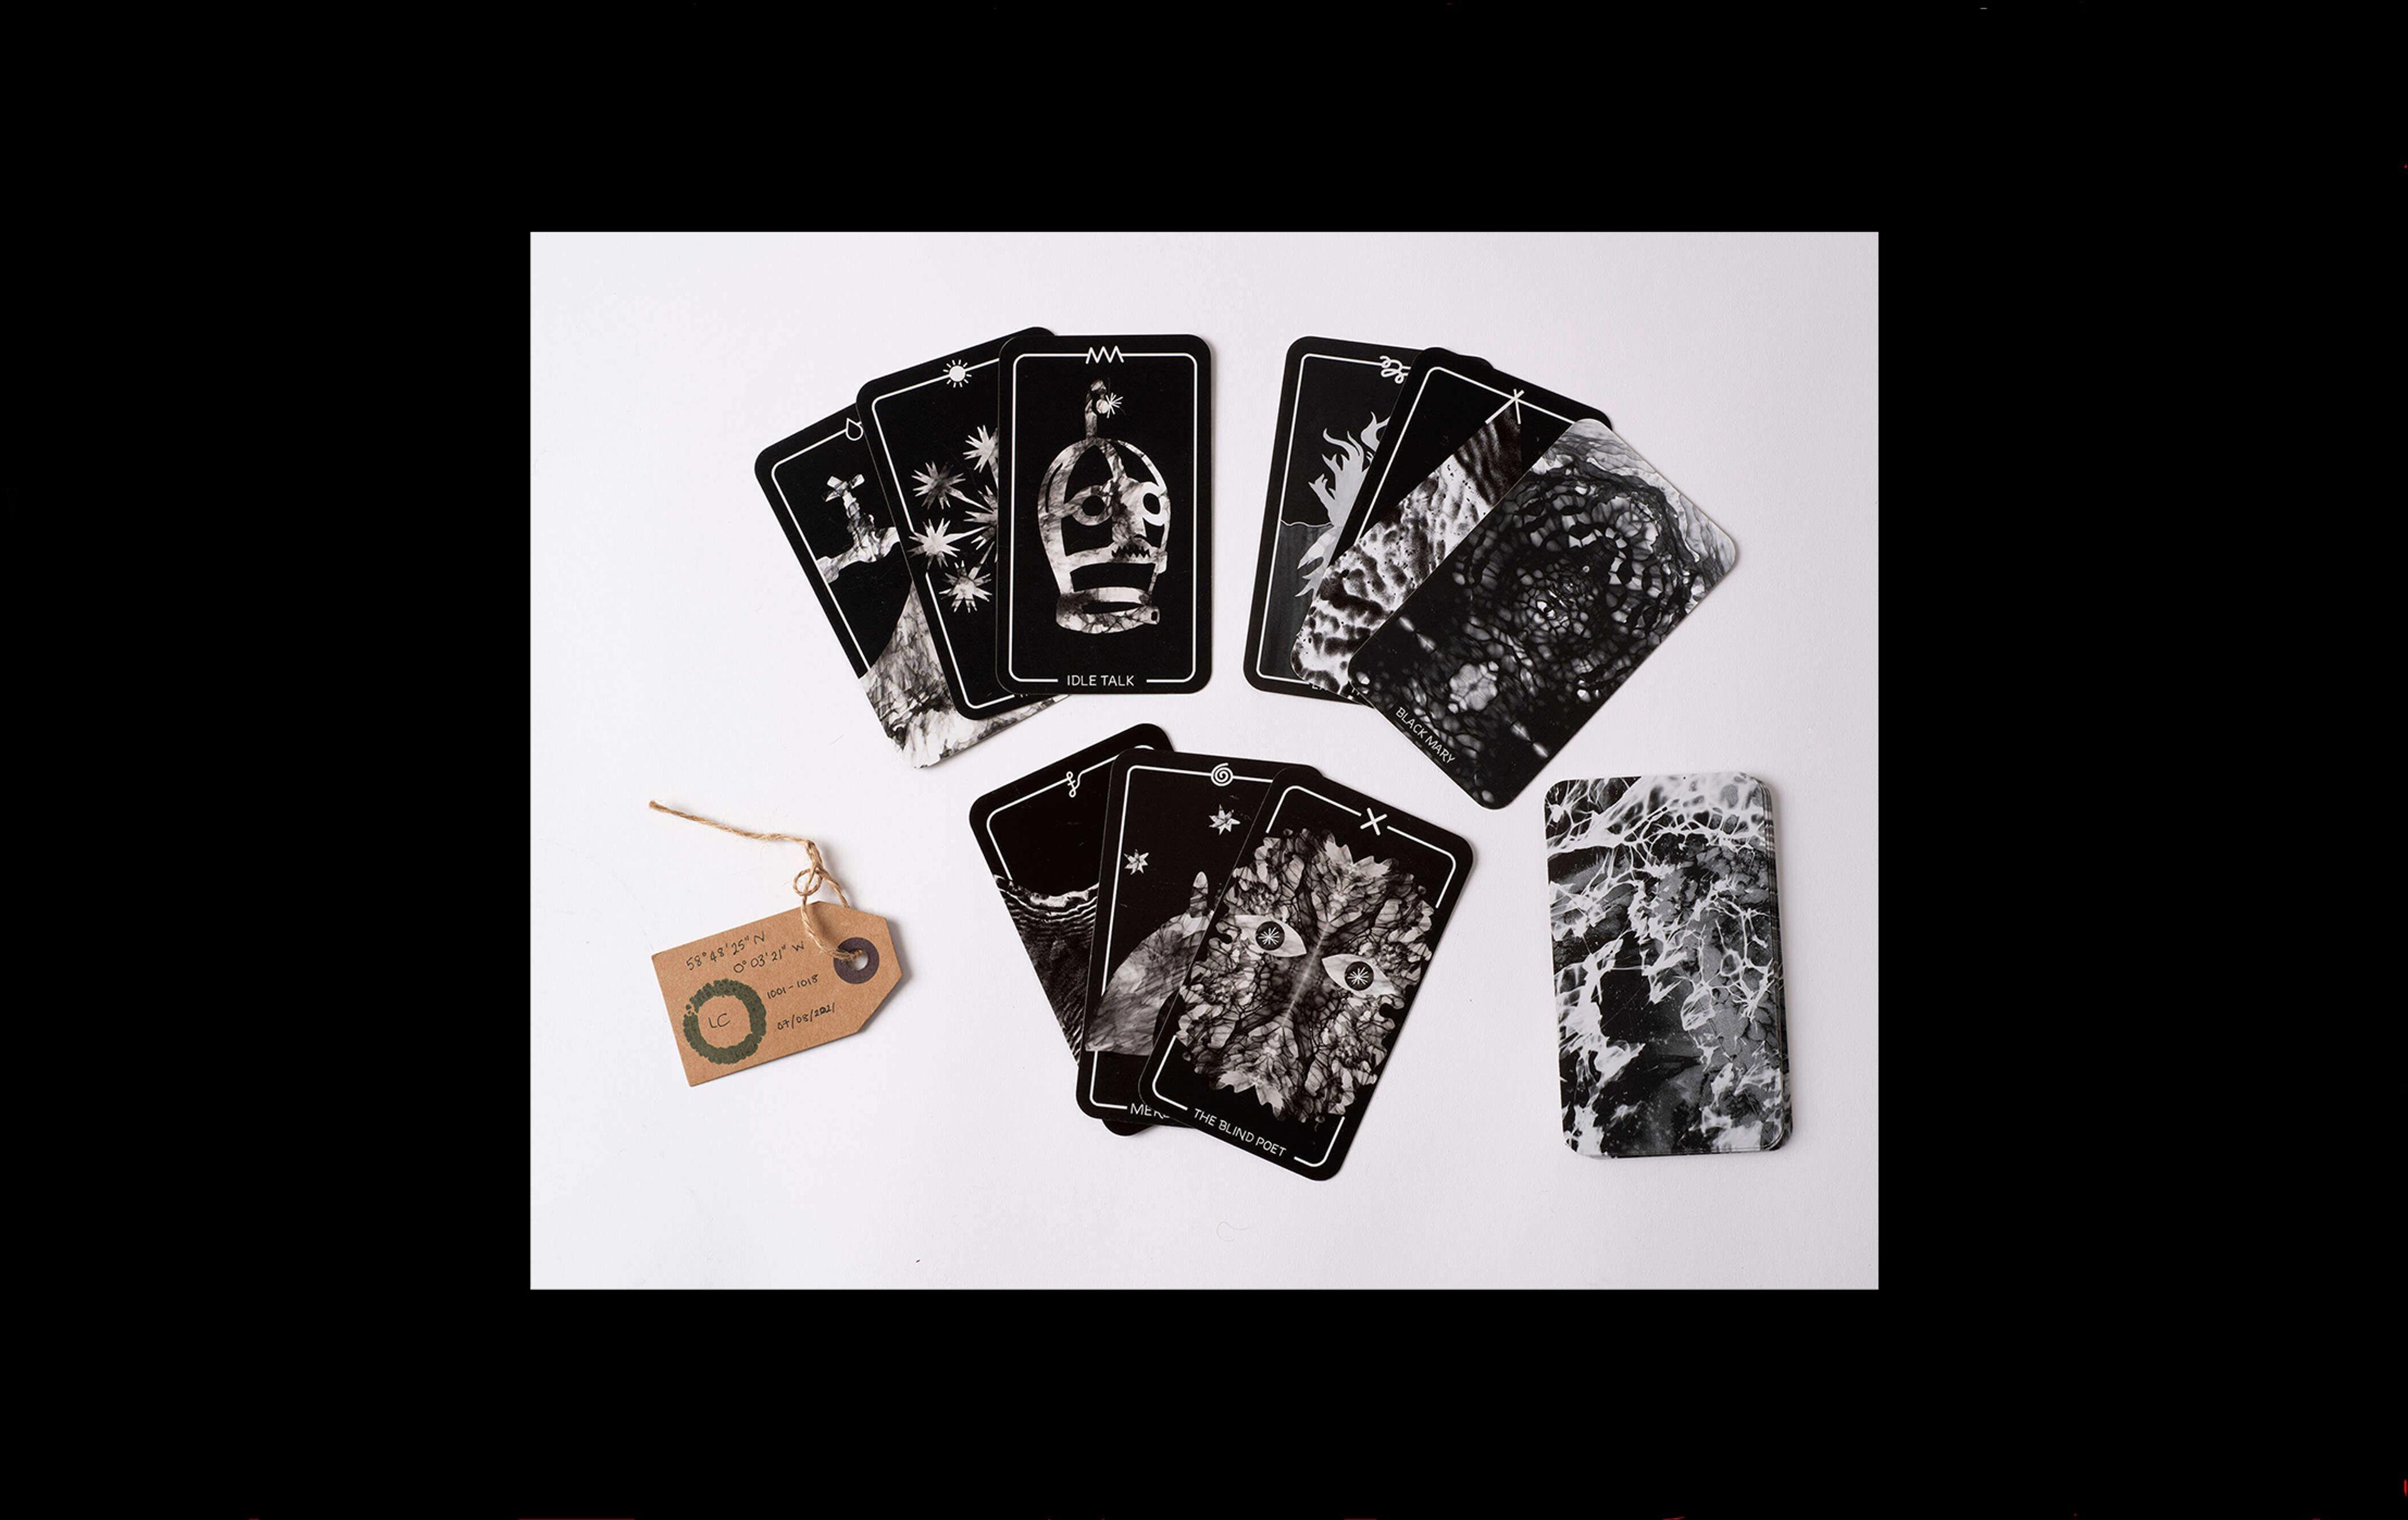 Photograph of back and white playing cards arranged in three hands. The top cards are 'idle talk' with an image of a scold's bridle, 'the blind poet' with two eyes and 'Black Mary' with an intricate pattern